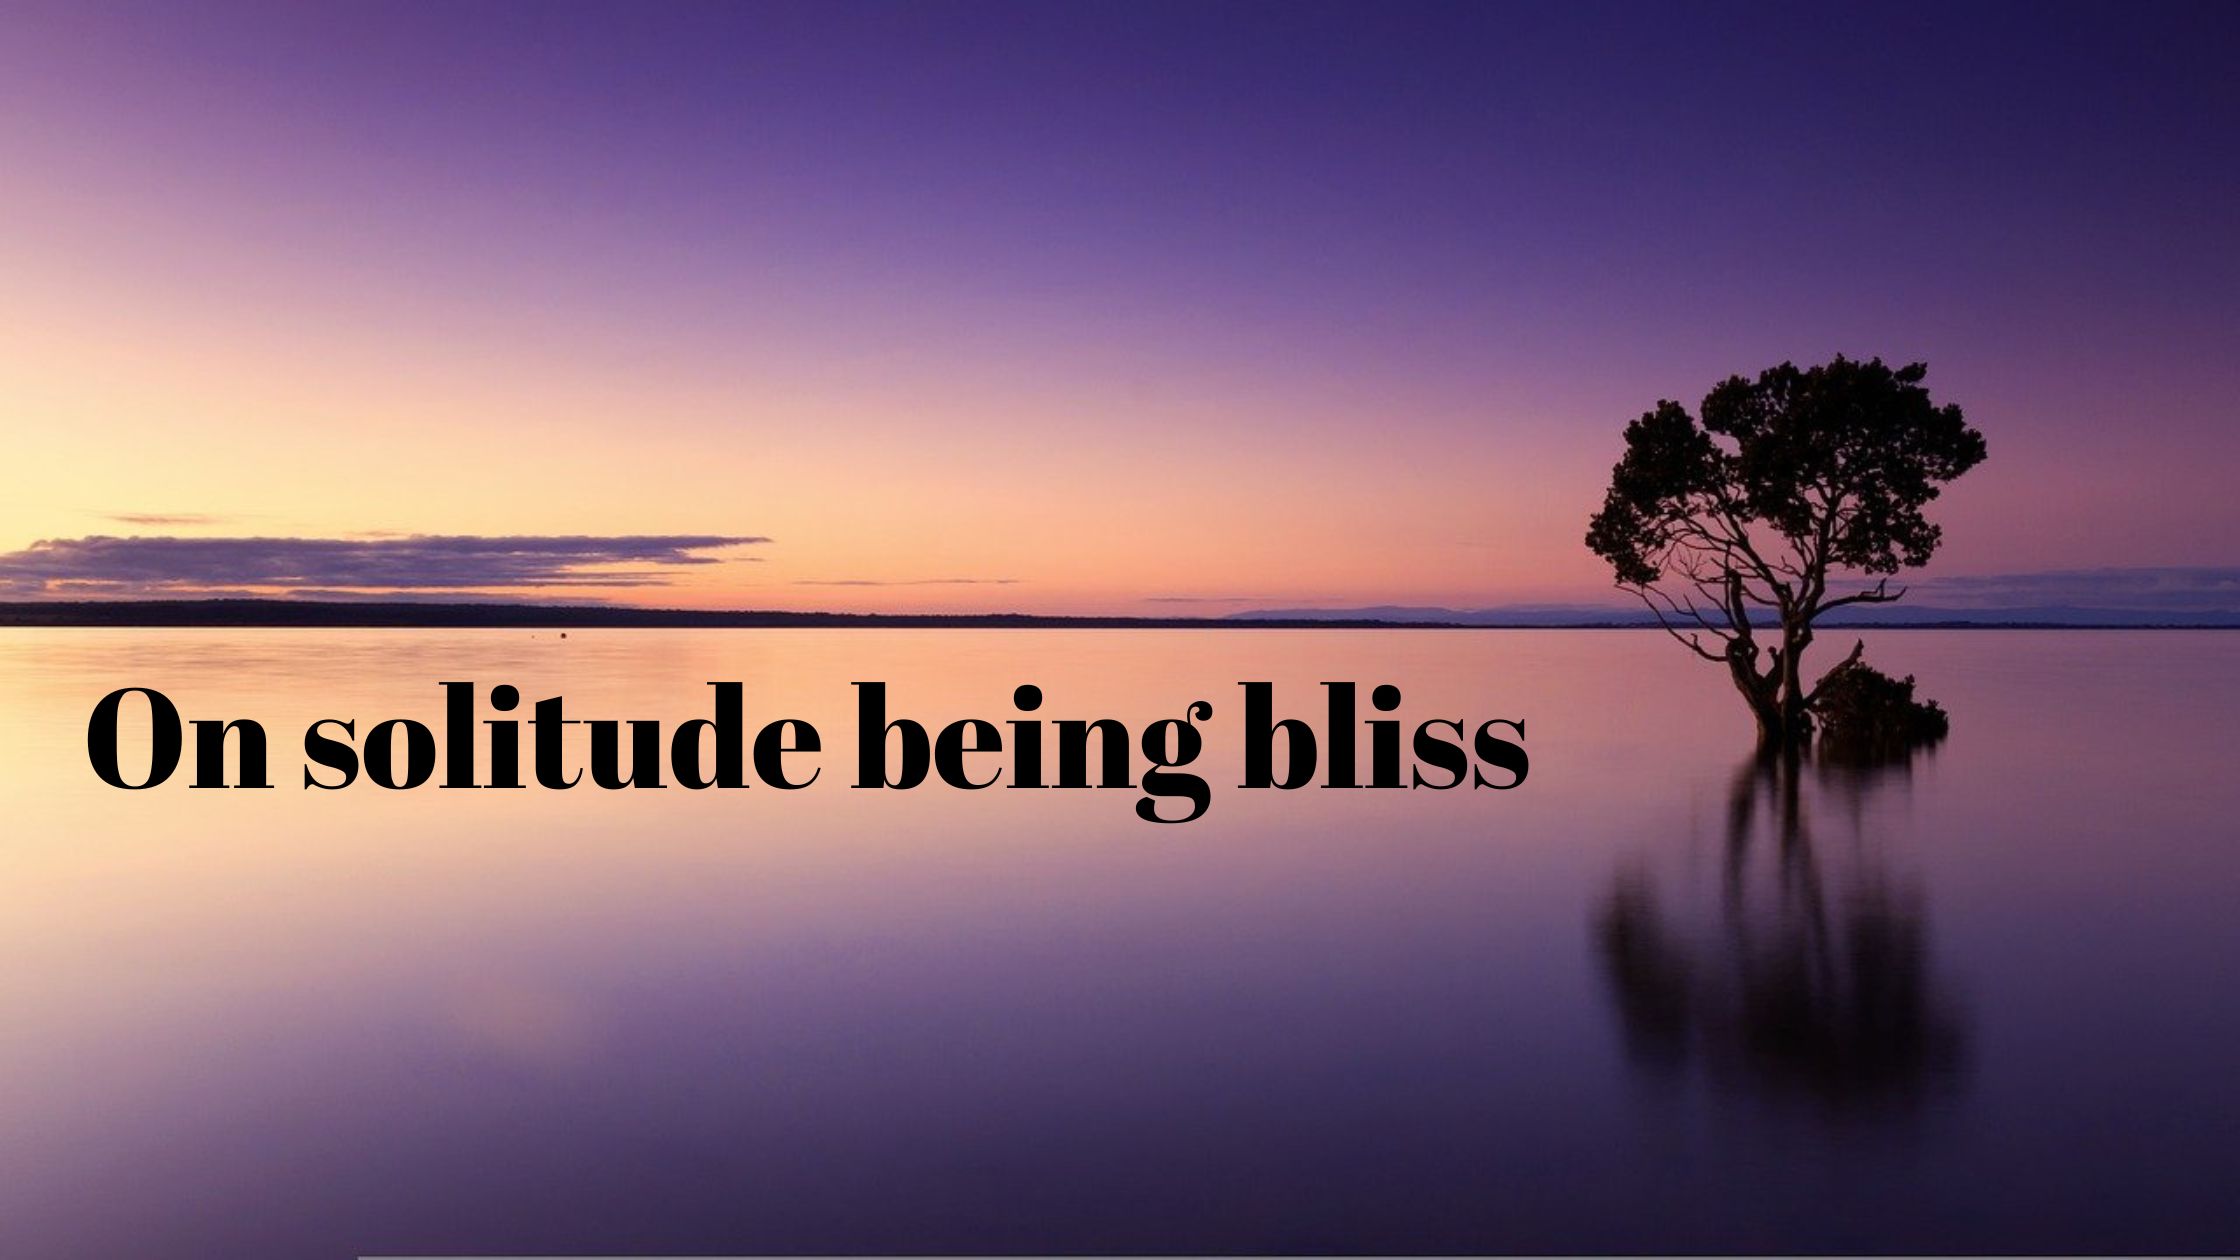 On solitude being bliss